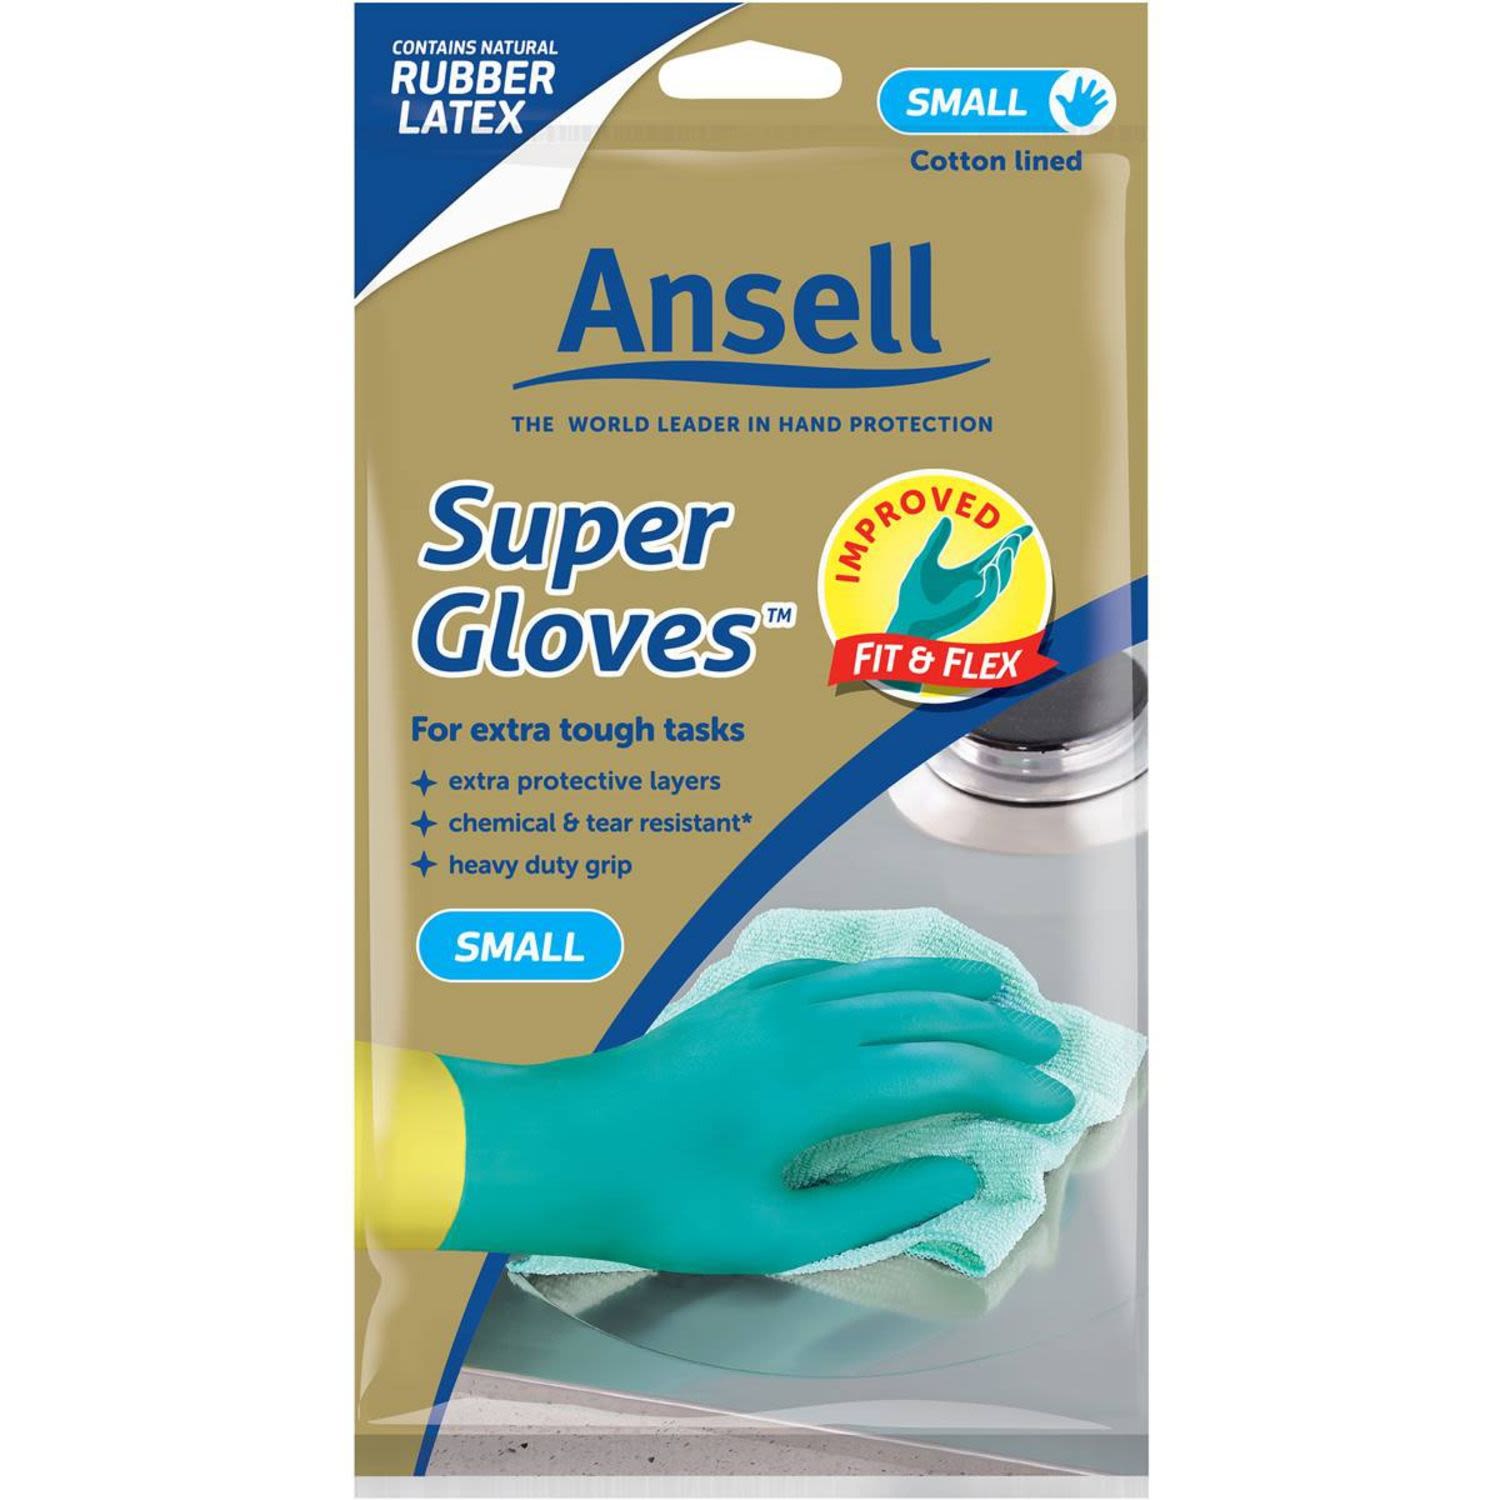 Ansell Gloves Super Small - Med Size 7.5, 1 Each